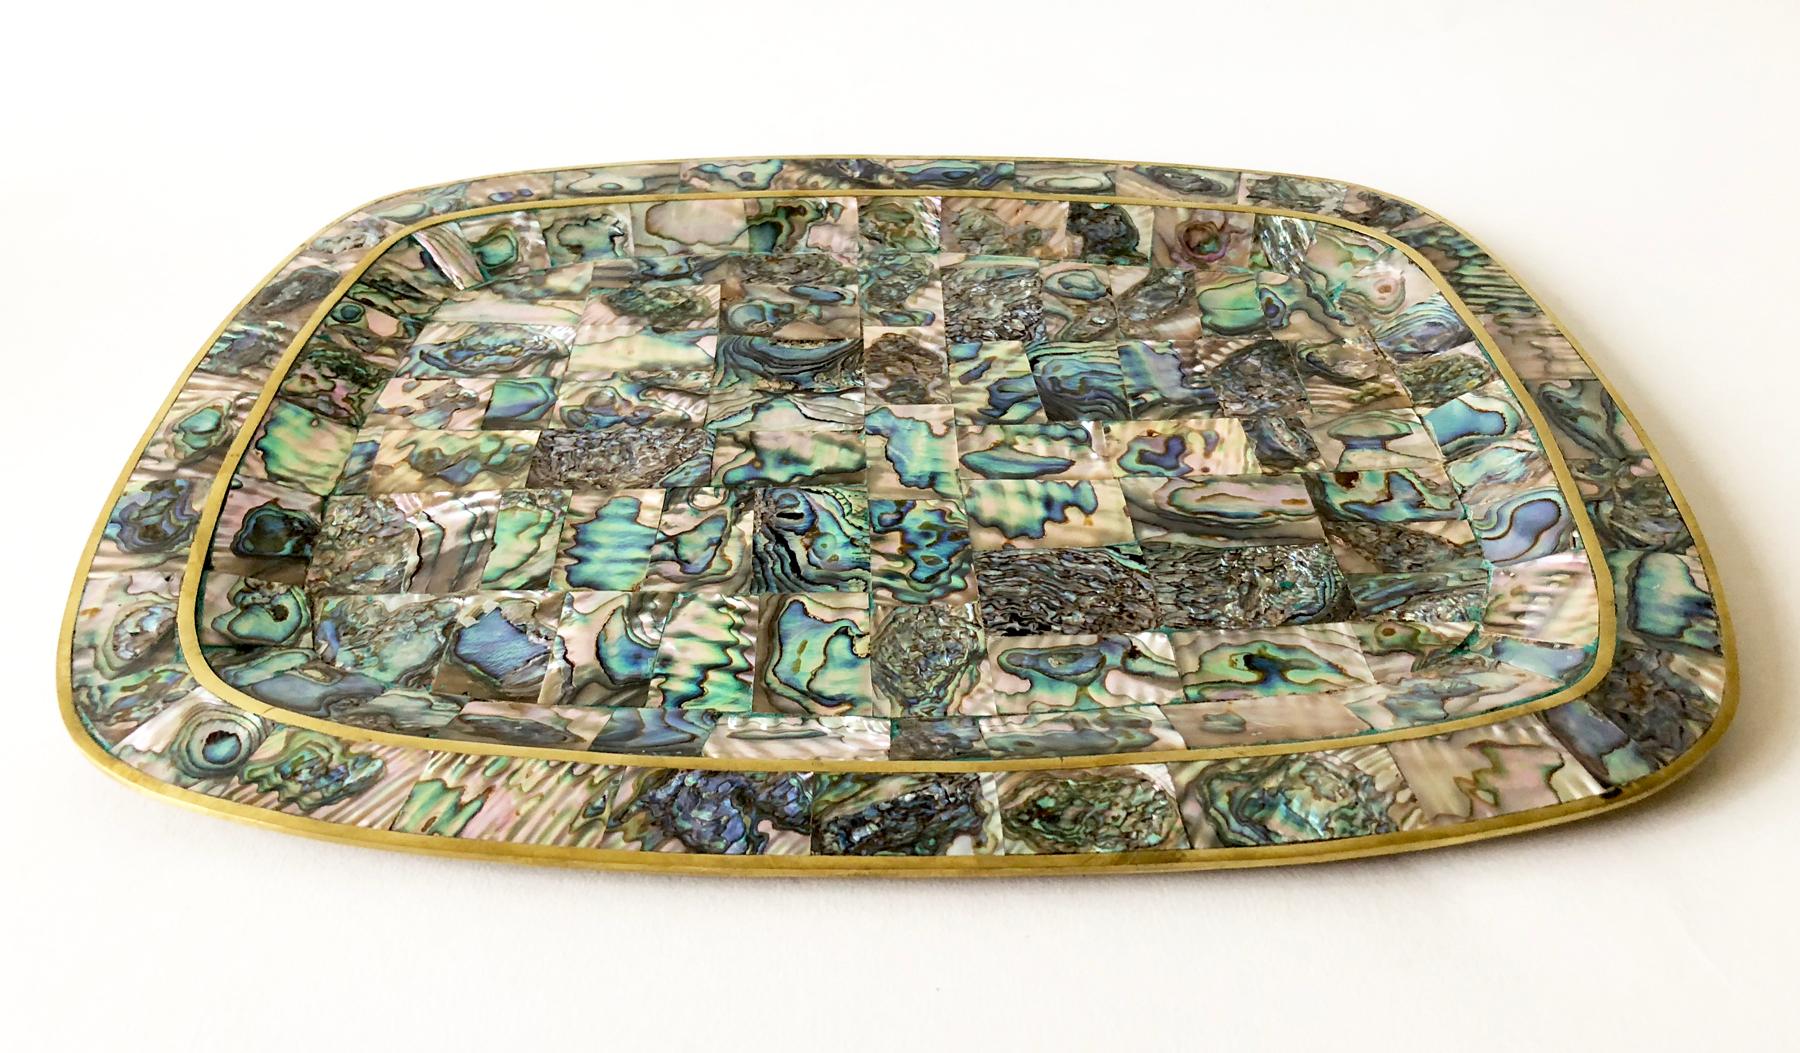 Inlaid abalone and brass tray, circa 1950s - 1960s. Tray measures 10.25